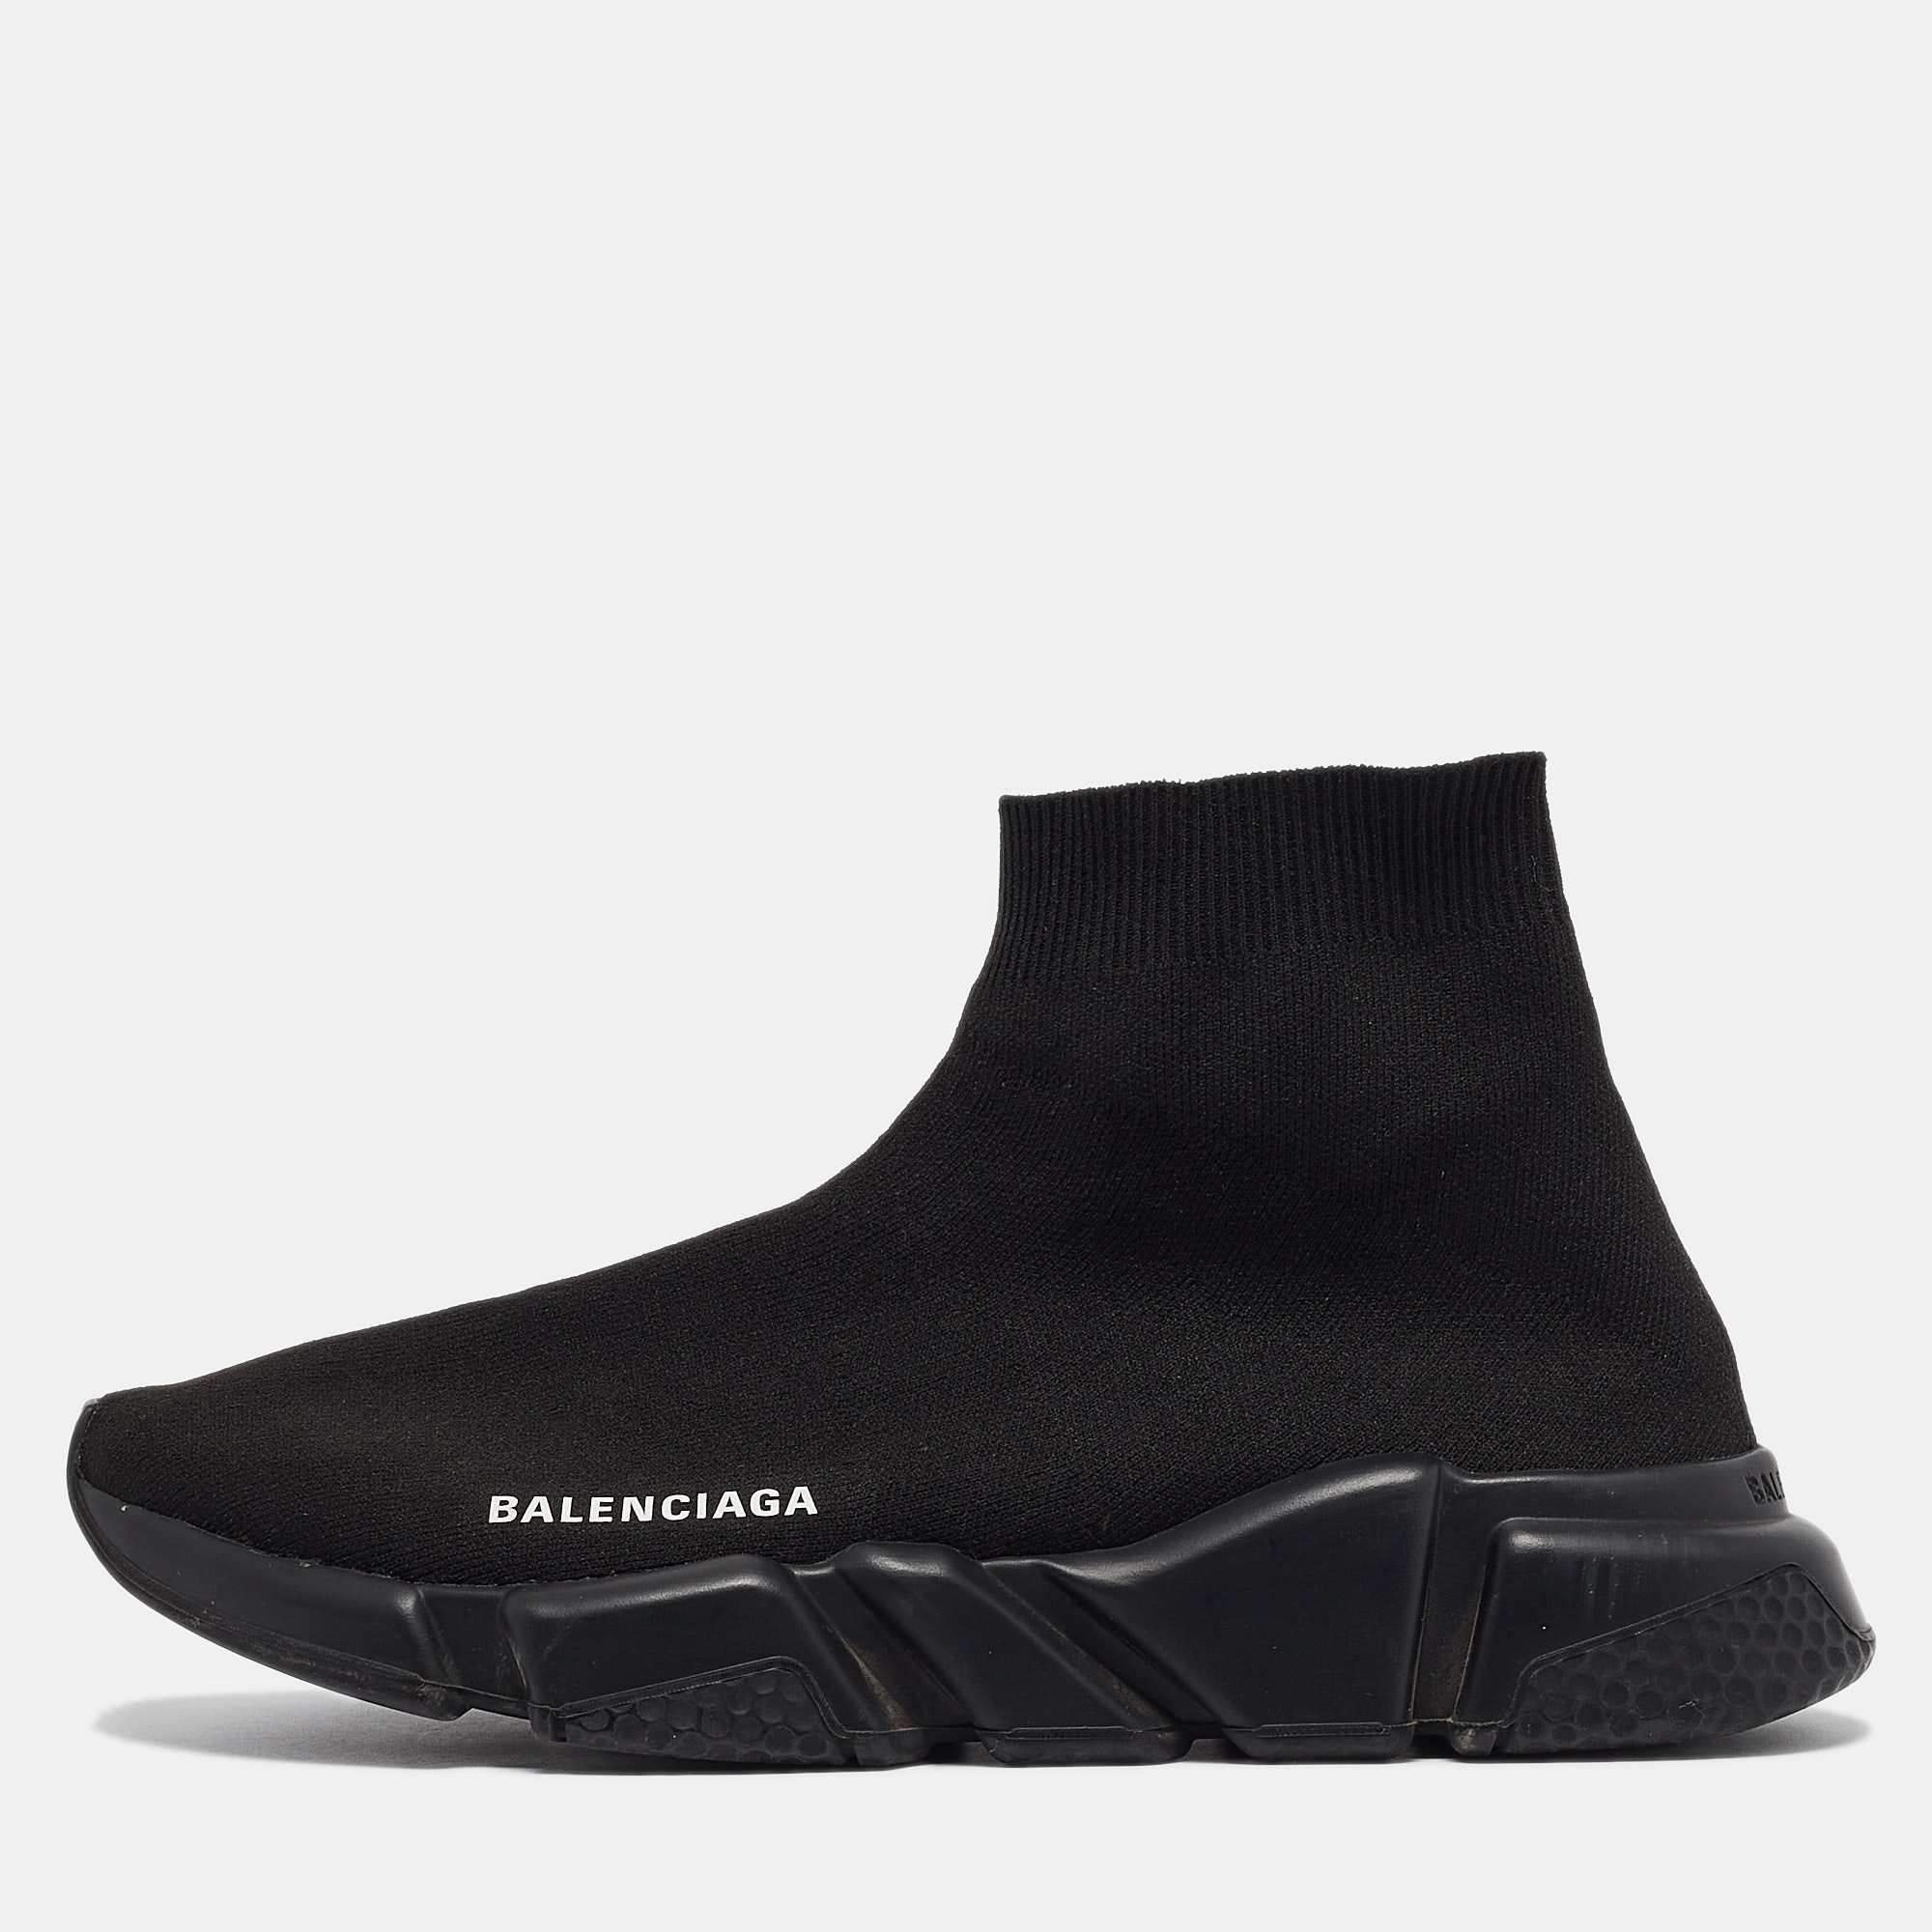 Pre-owned Balenciaga Black Knit Fabric Speed Trainer Sneakers Size 40